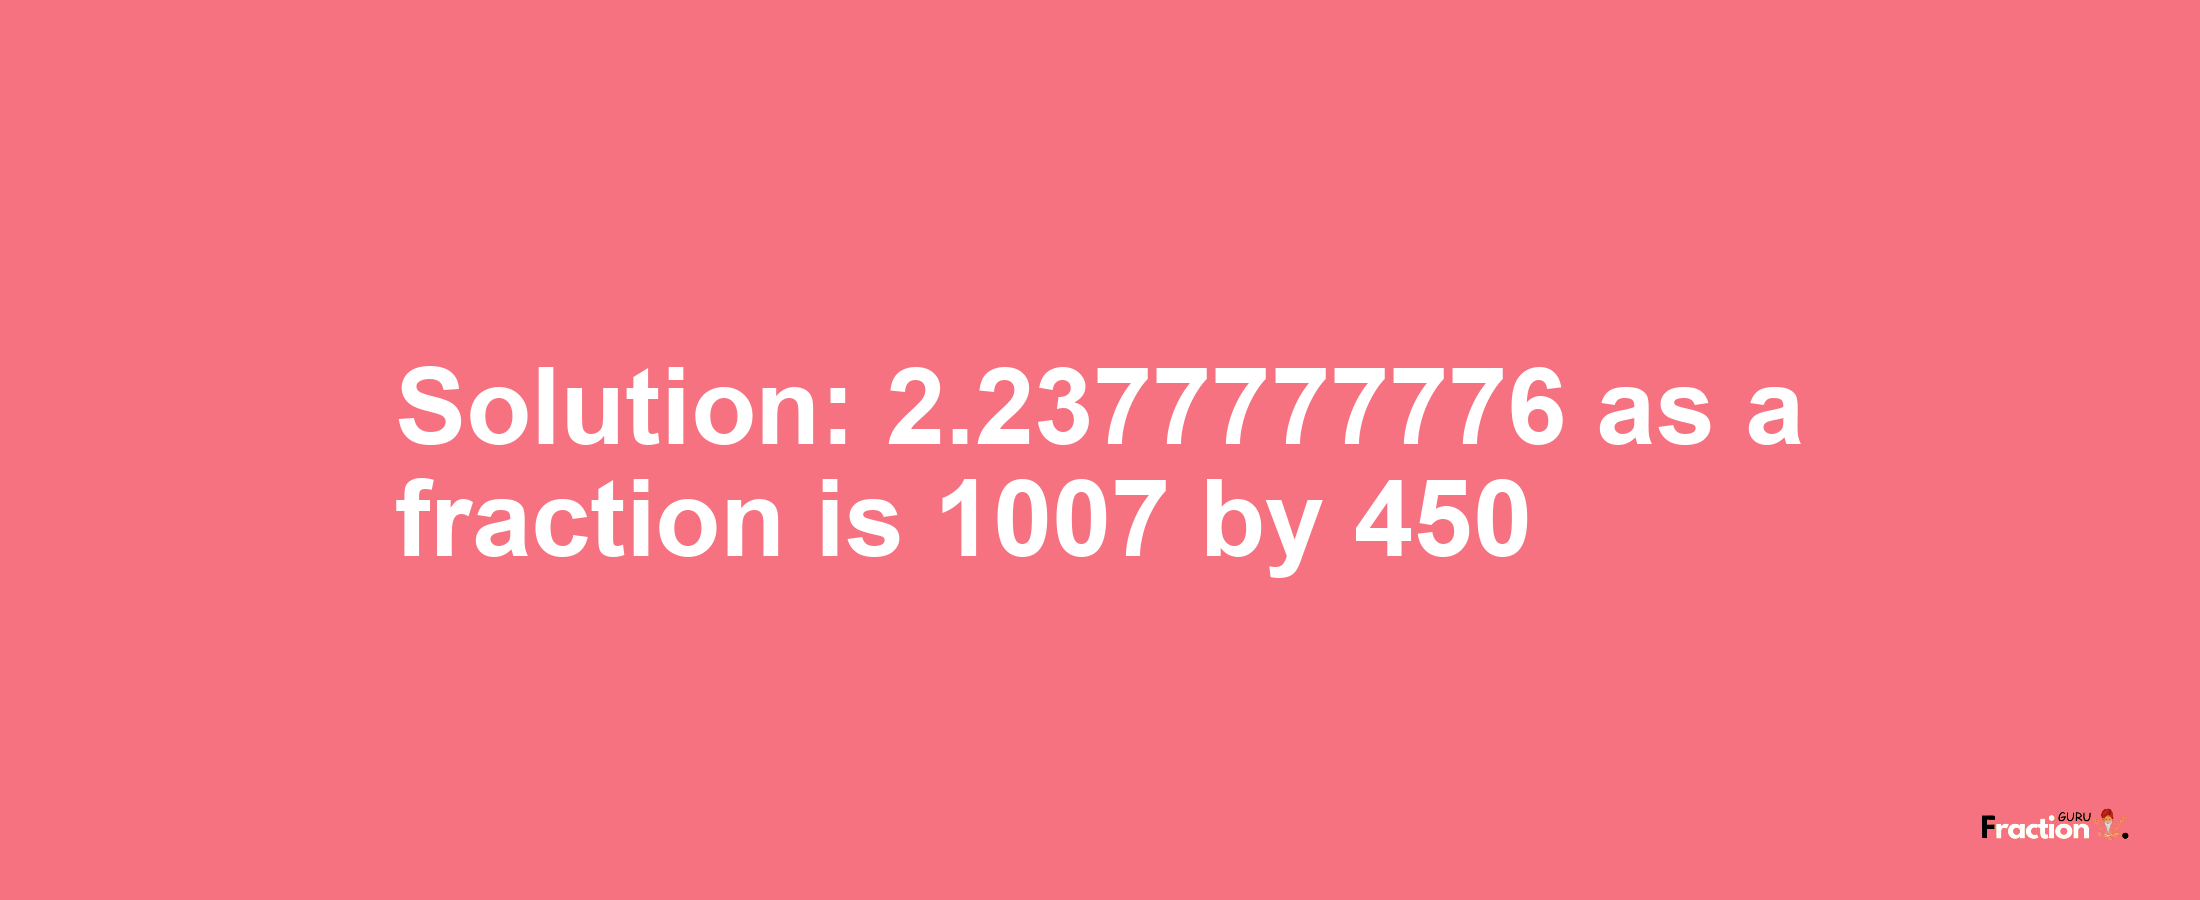 Solution:2.2377777776 as a fraction is 1007/450